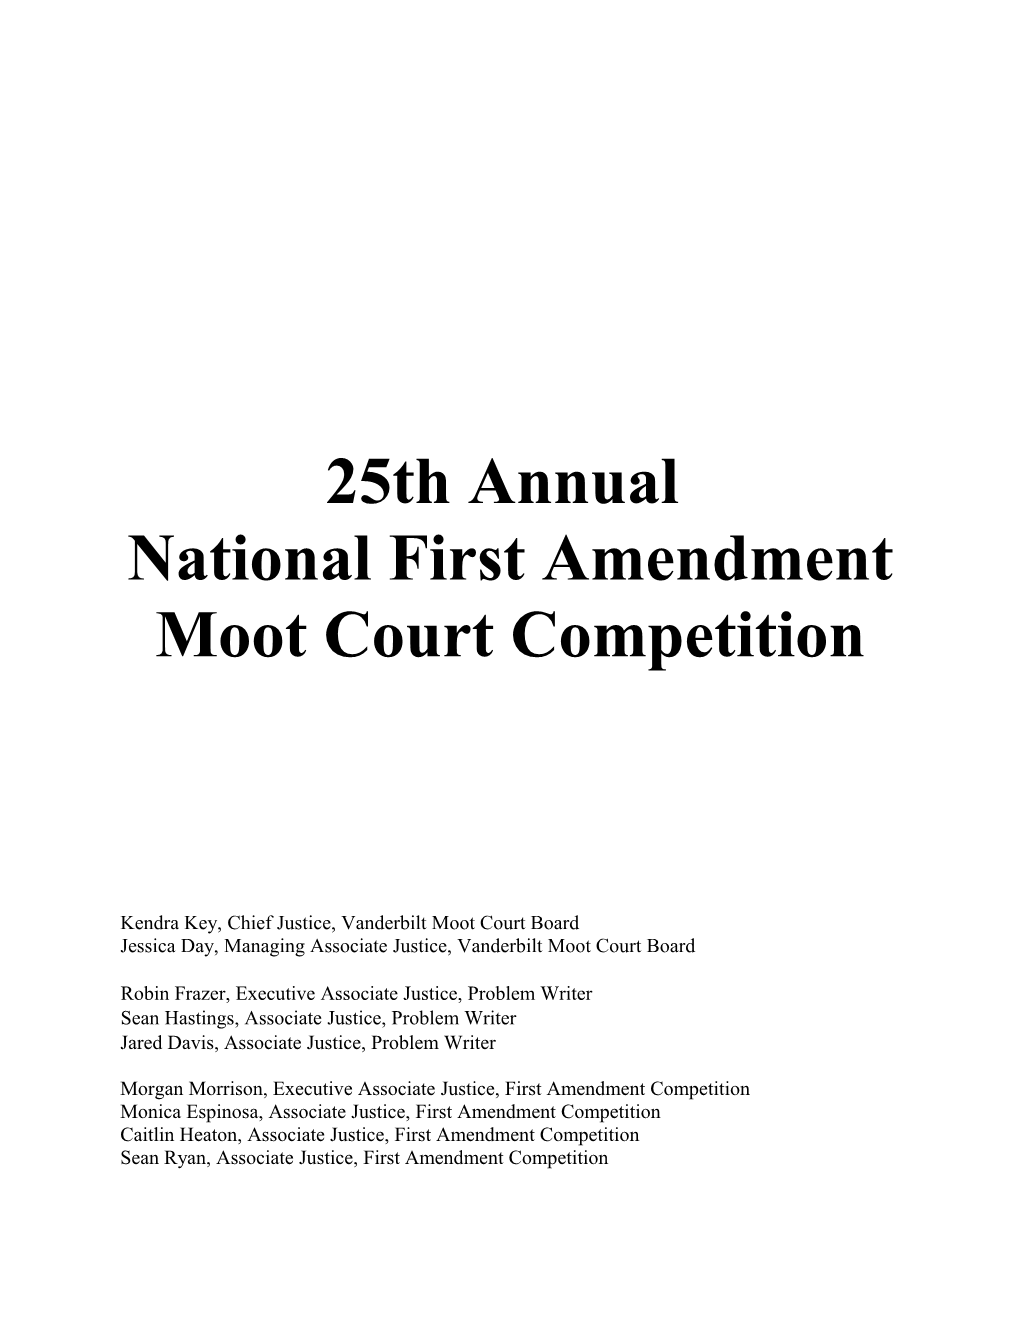 National First Amendment Moot Court Competition